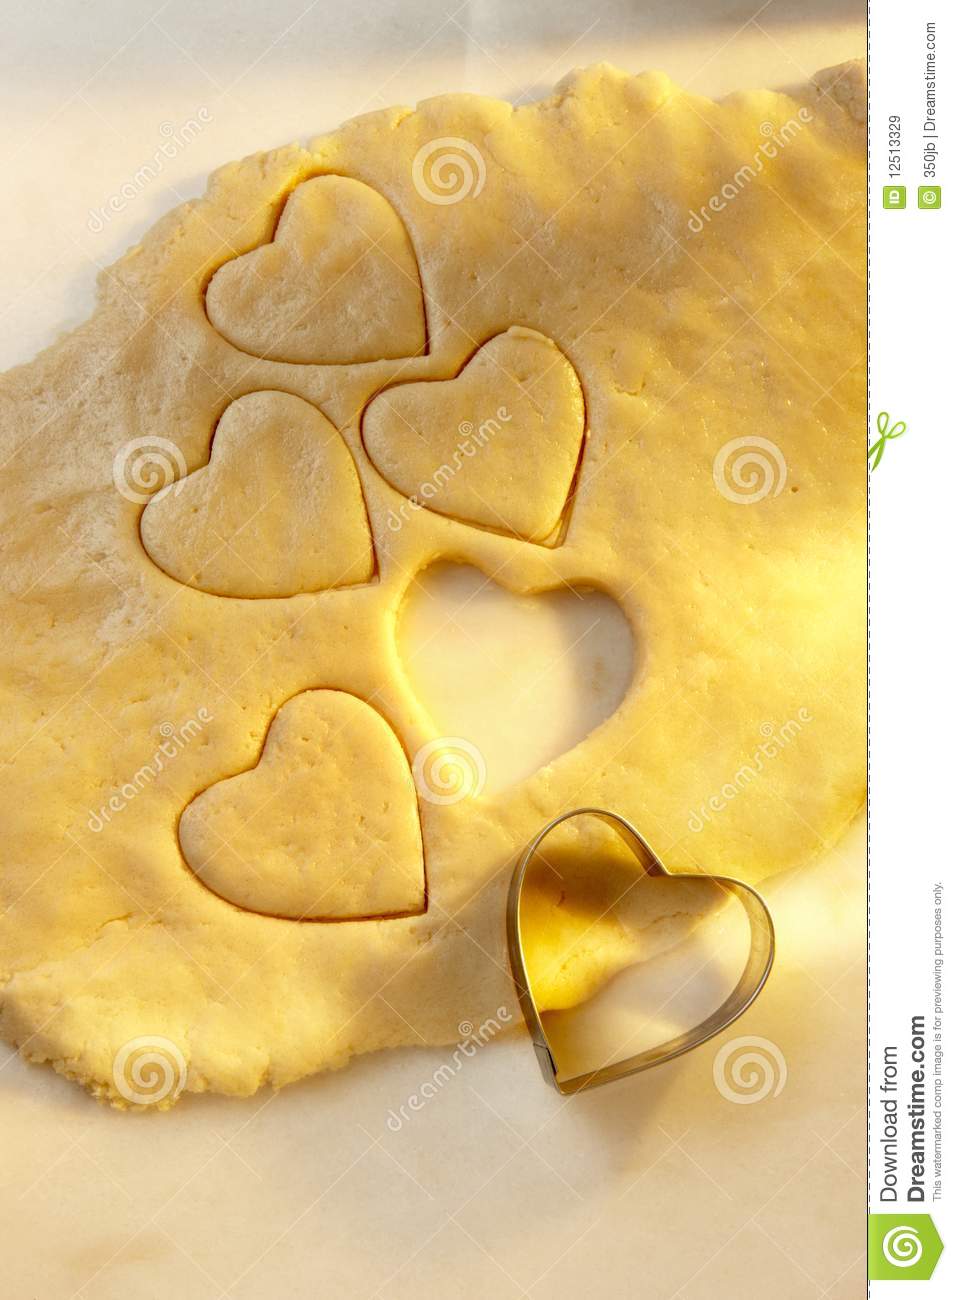 Heart Shaped Cookie Cutter With Dough Royalty Free Stock Images